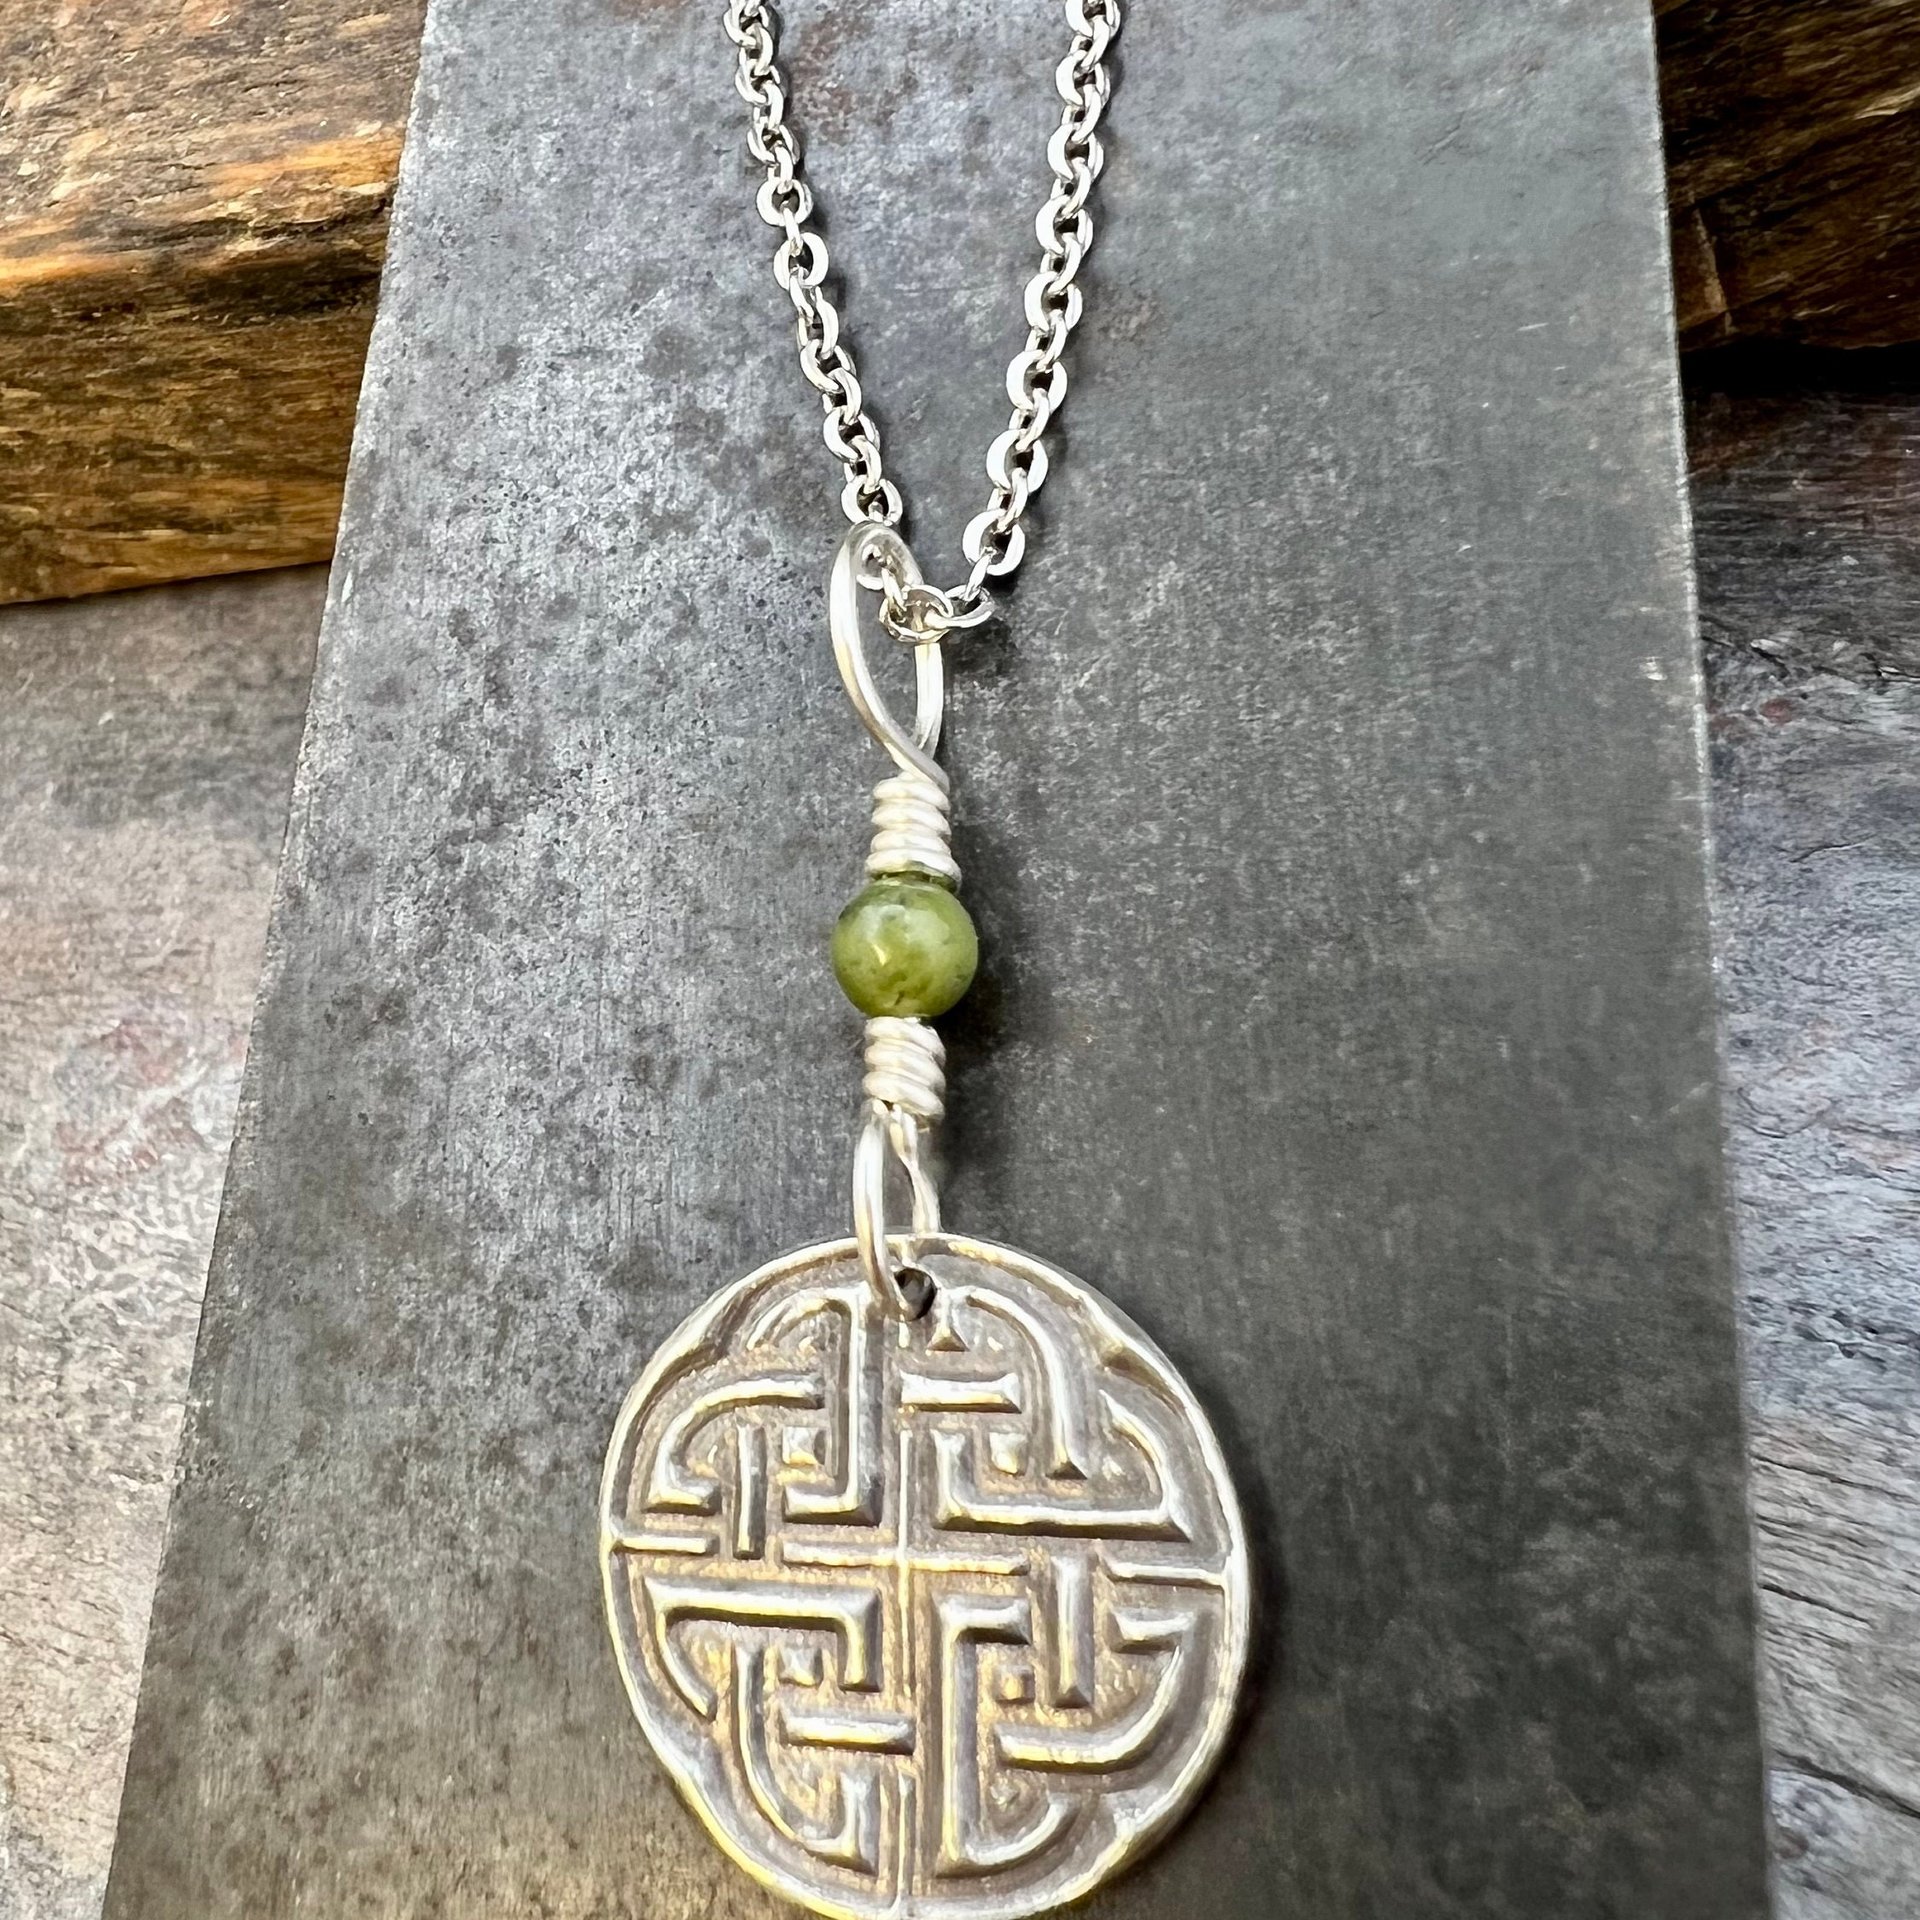 Sterling Silver, Celtic Knot Wax Seal Charm, Connemara Marble, Irish Celtic Jewelry, Pagan Art, Leather & Vegan Cords, Stainless Chains